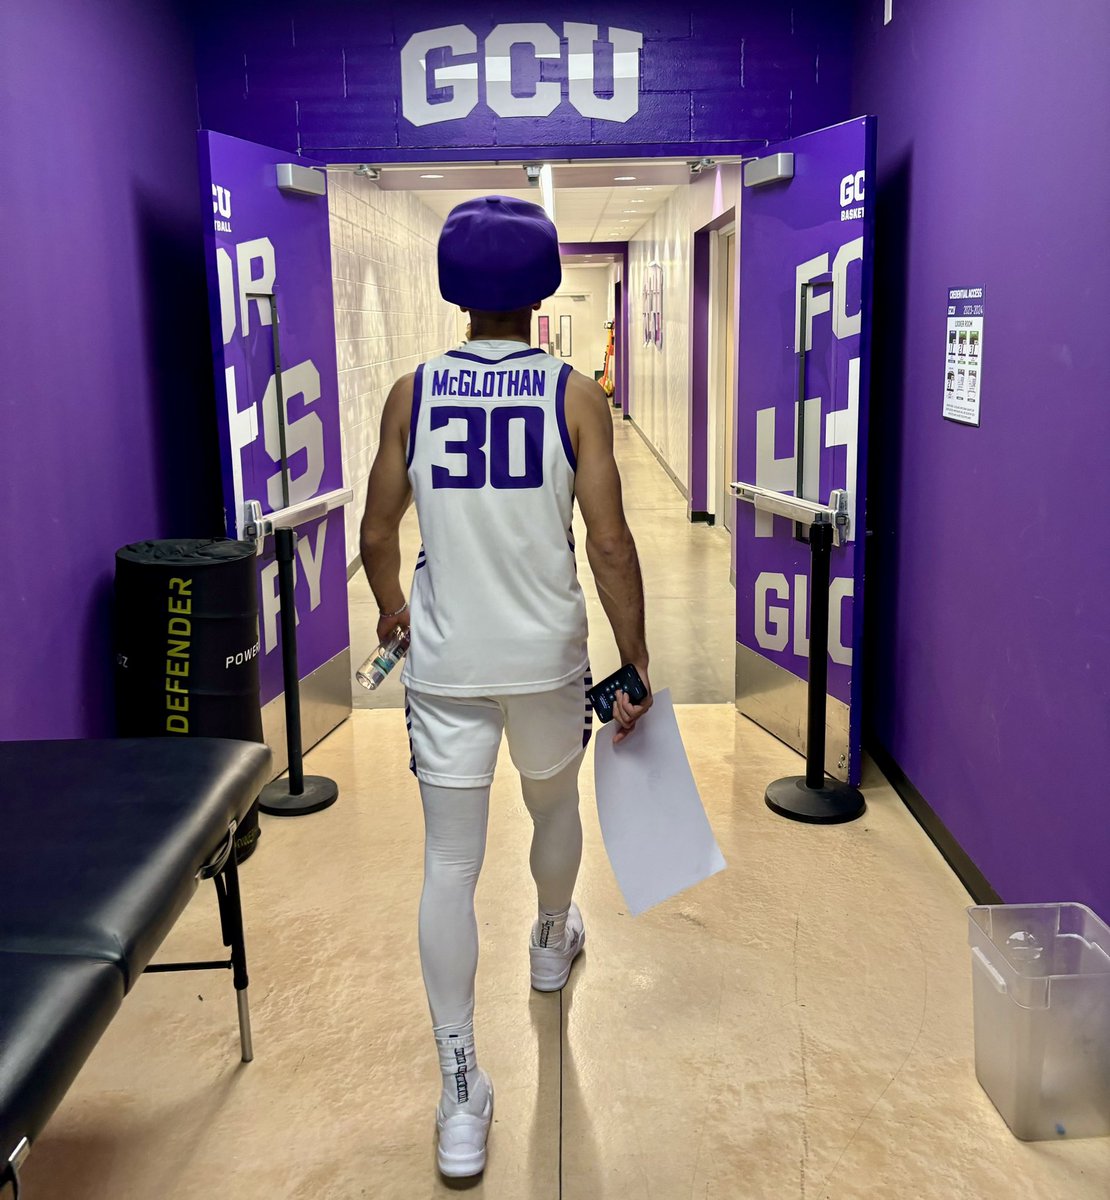 Gabe McGlothan leaves the GCU court a winner for the final time. The last to leave, per usual.